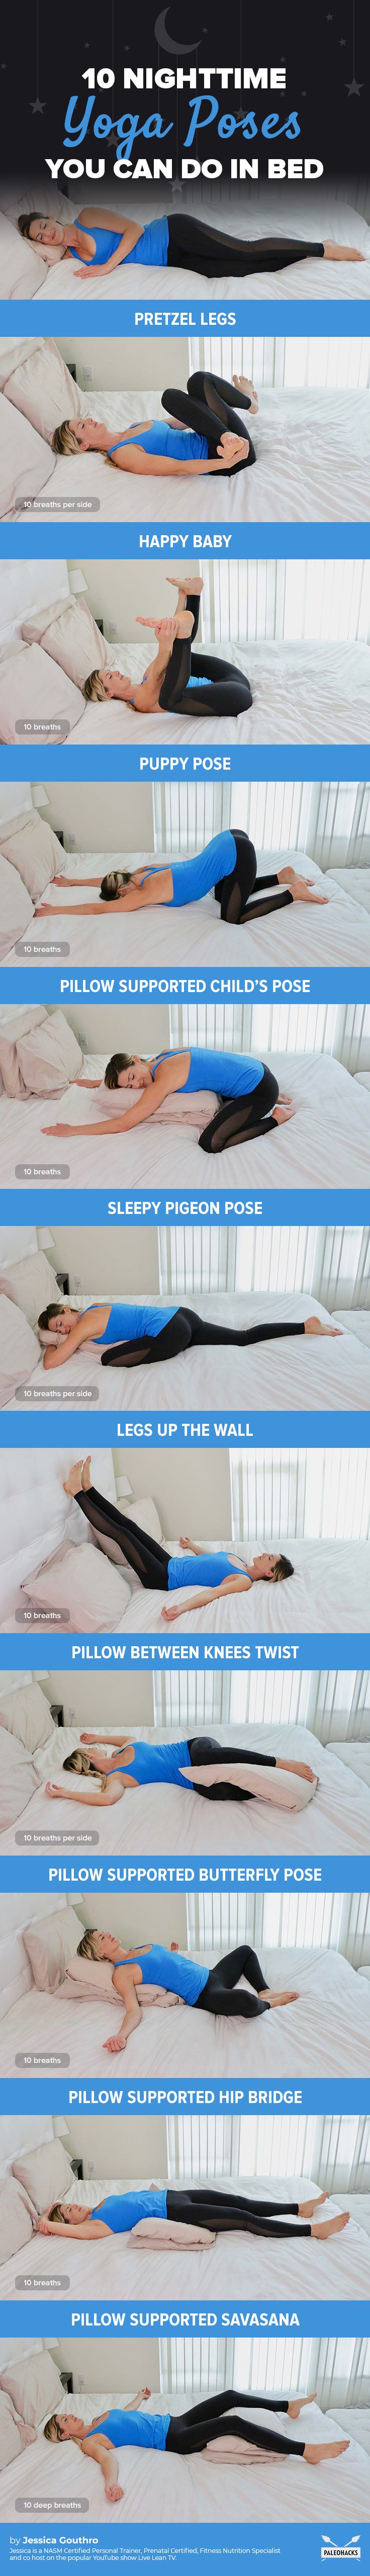 When you can’t seem to get the shut-eye you desperately need, try these relaxing yoga poses you can do right in bed to help you get to sleep fast.